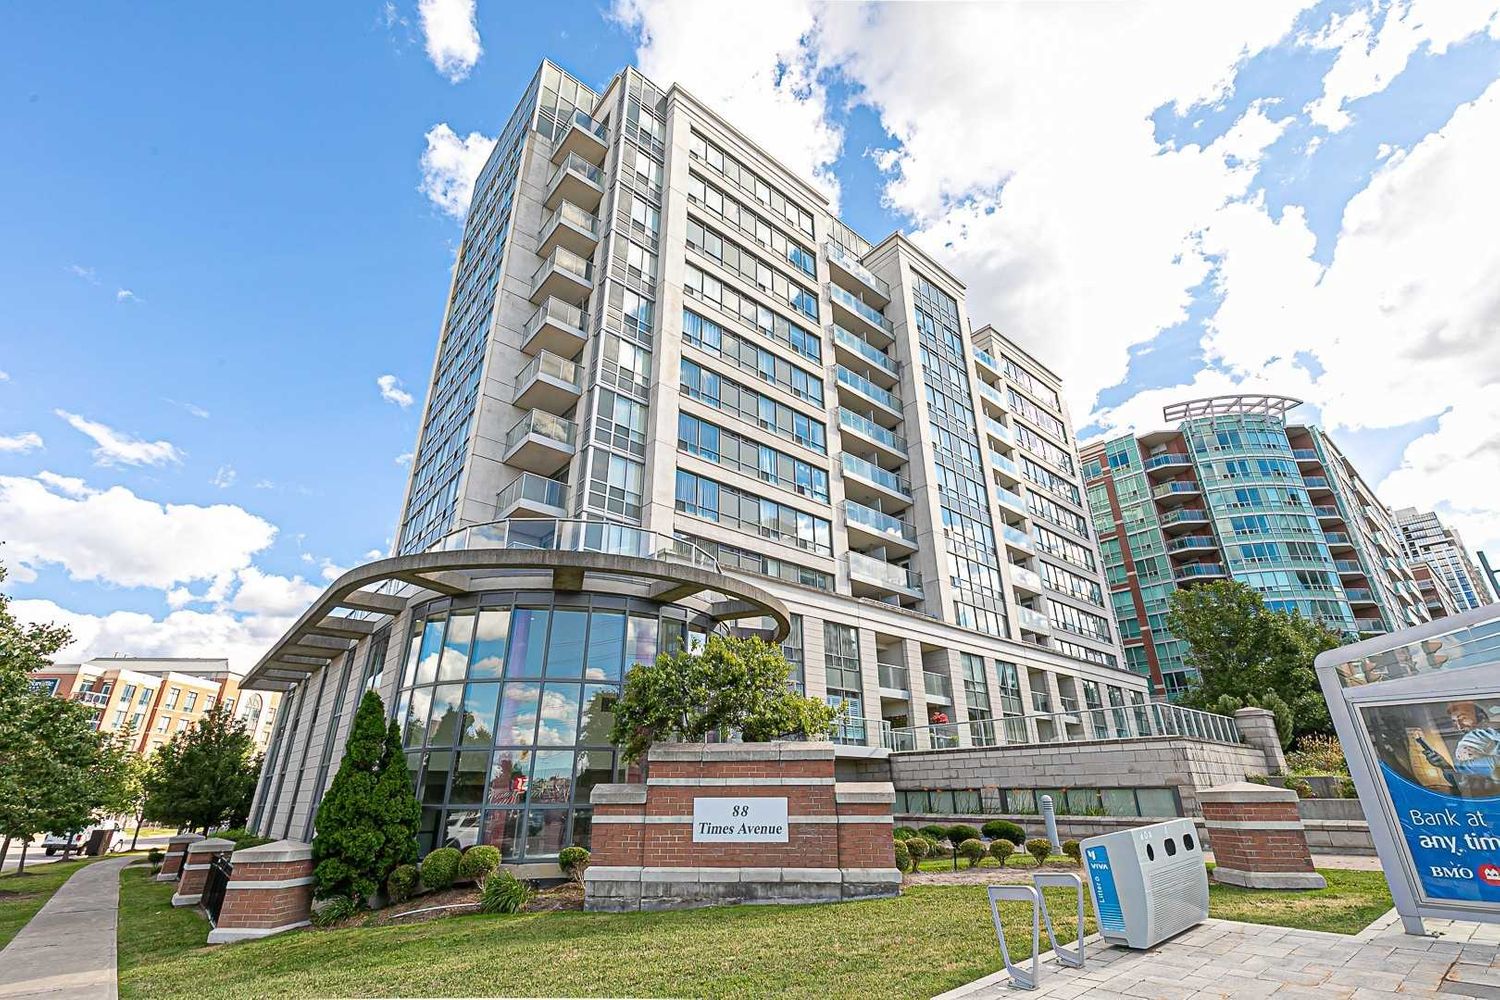 68-88 Times Avenue. Victoria Tower Condos is located in  Markham, Toronto - image #1 of 2